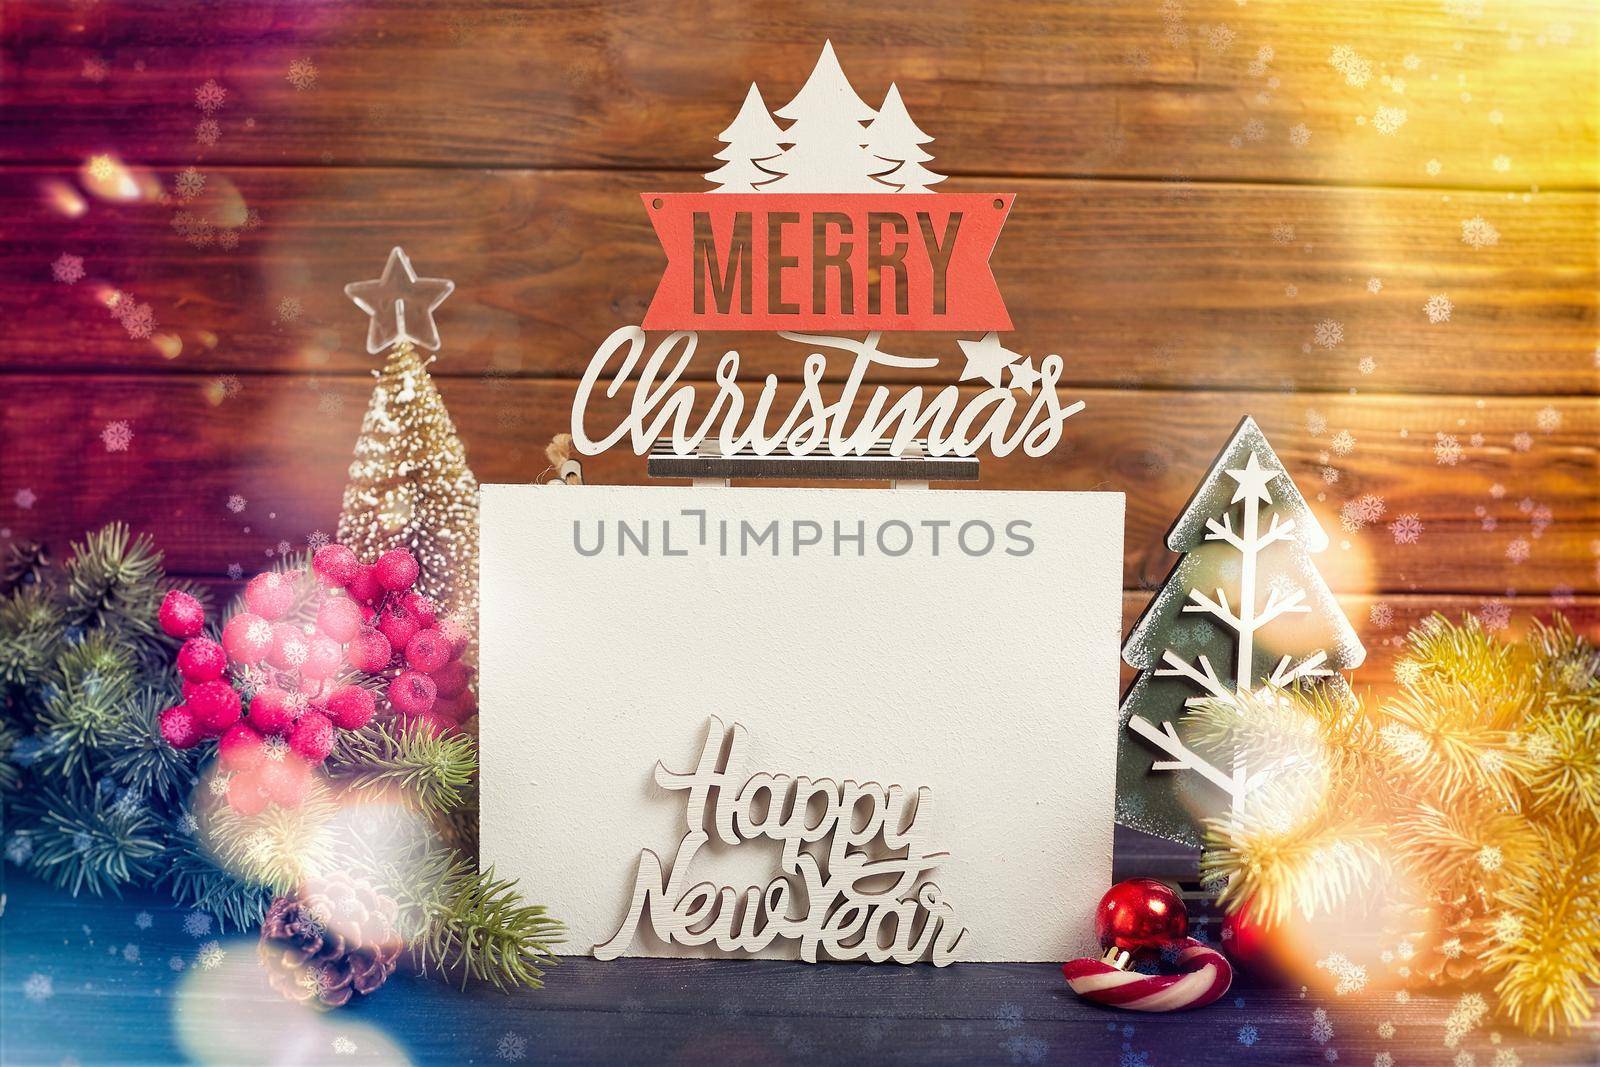 Christmas background with festive decoration and text , Merry Christmas and happy new year concept by Maximusnd